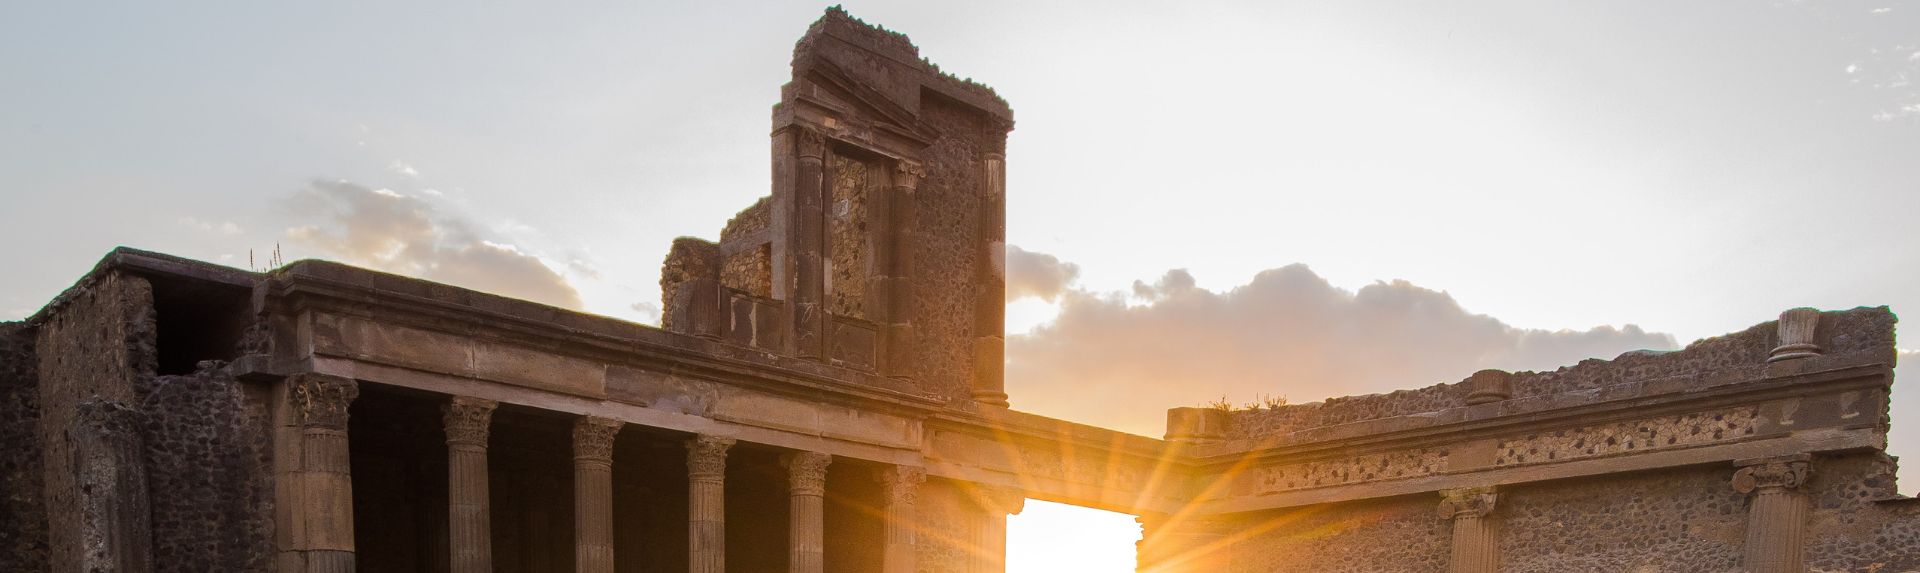 Is it worth getting a guided tour of Pompeii?